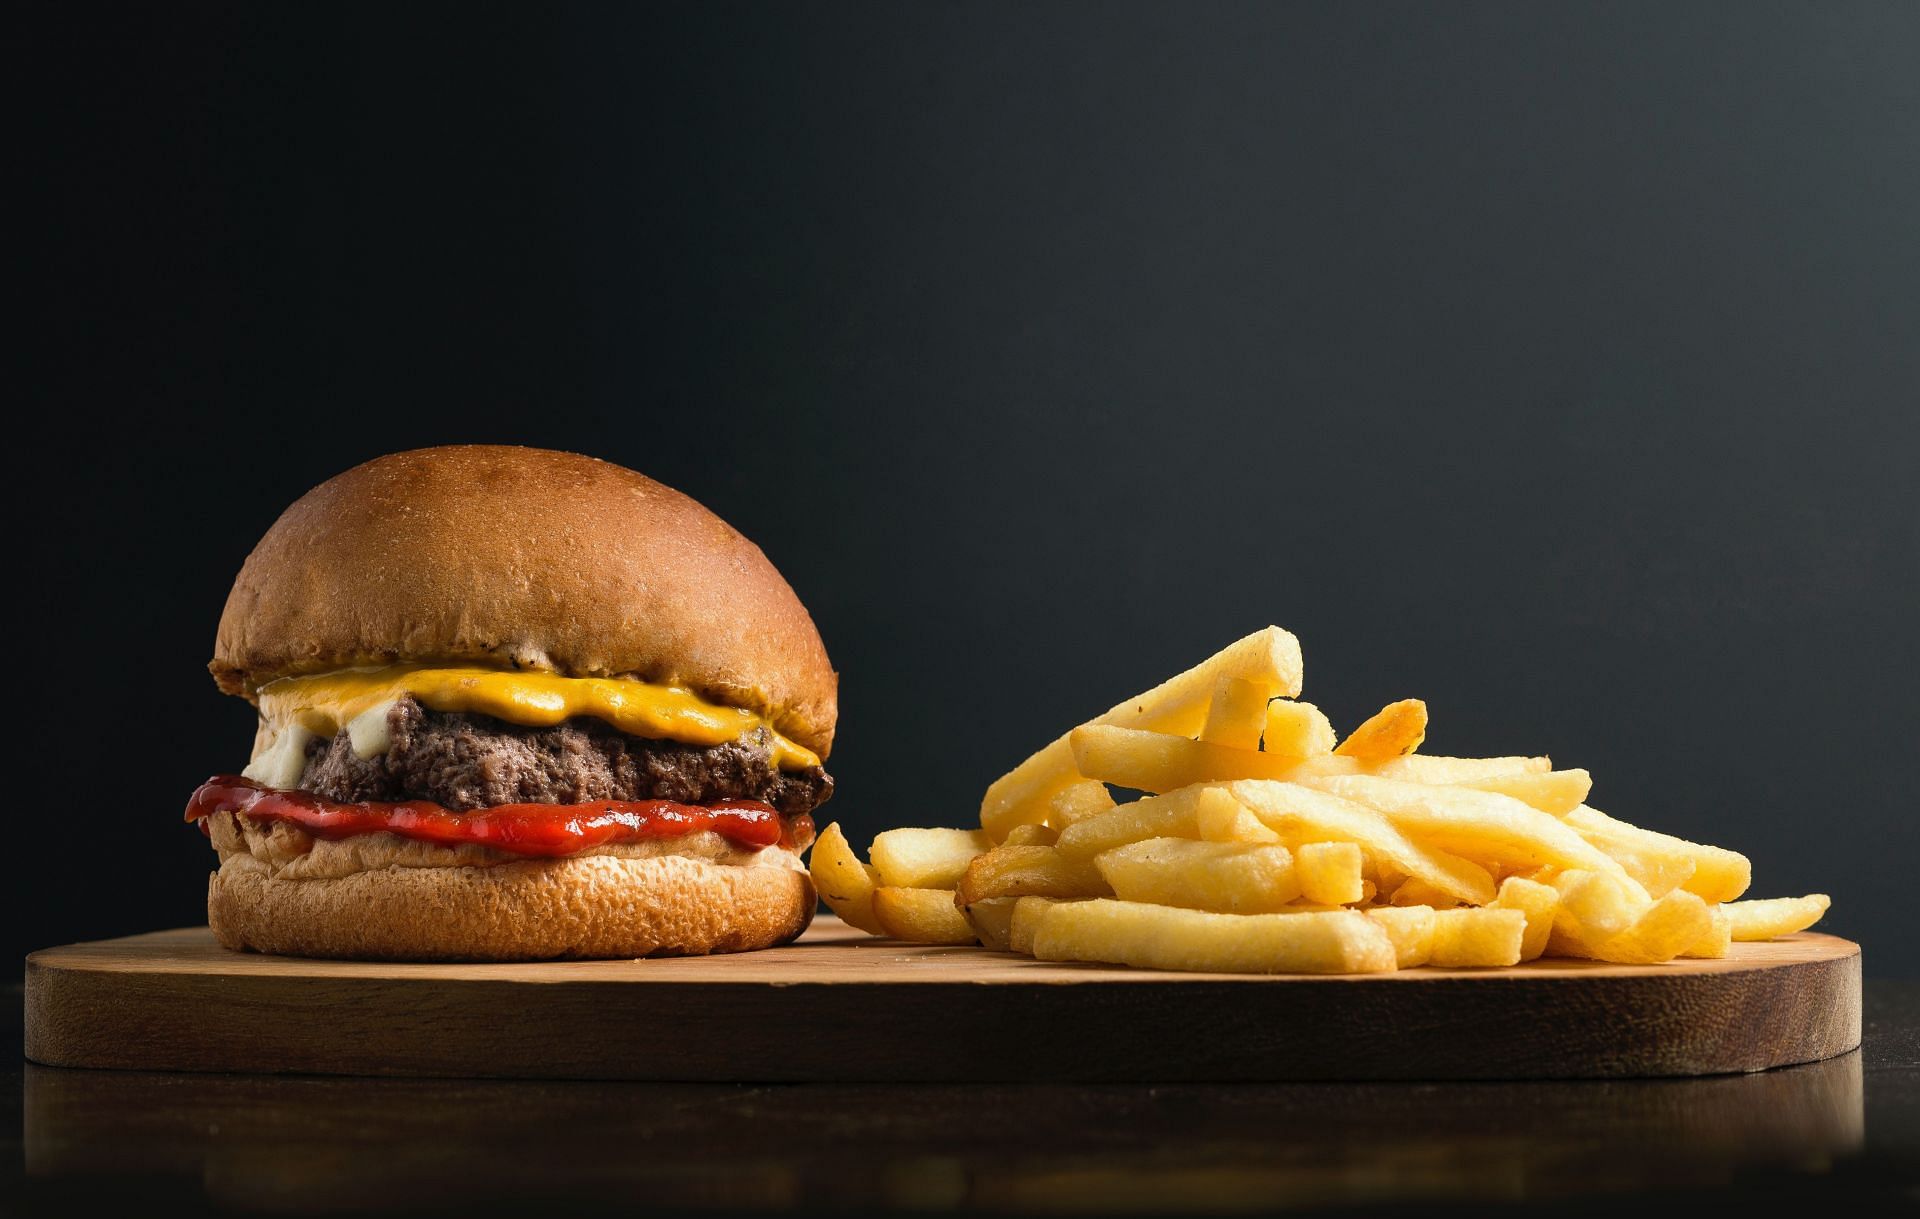 Avoid junk and processed foods.(Photo by Daniel Reche via pexels)